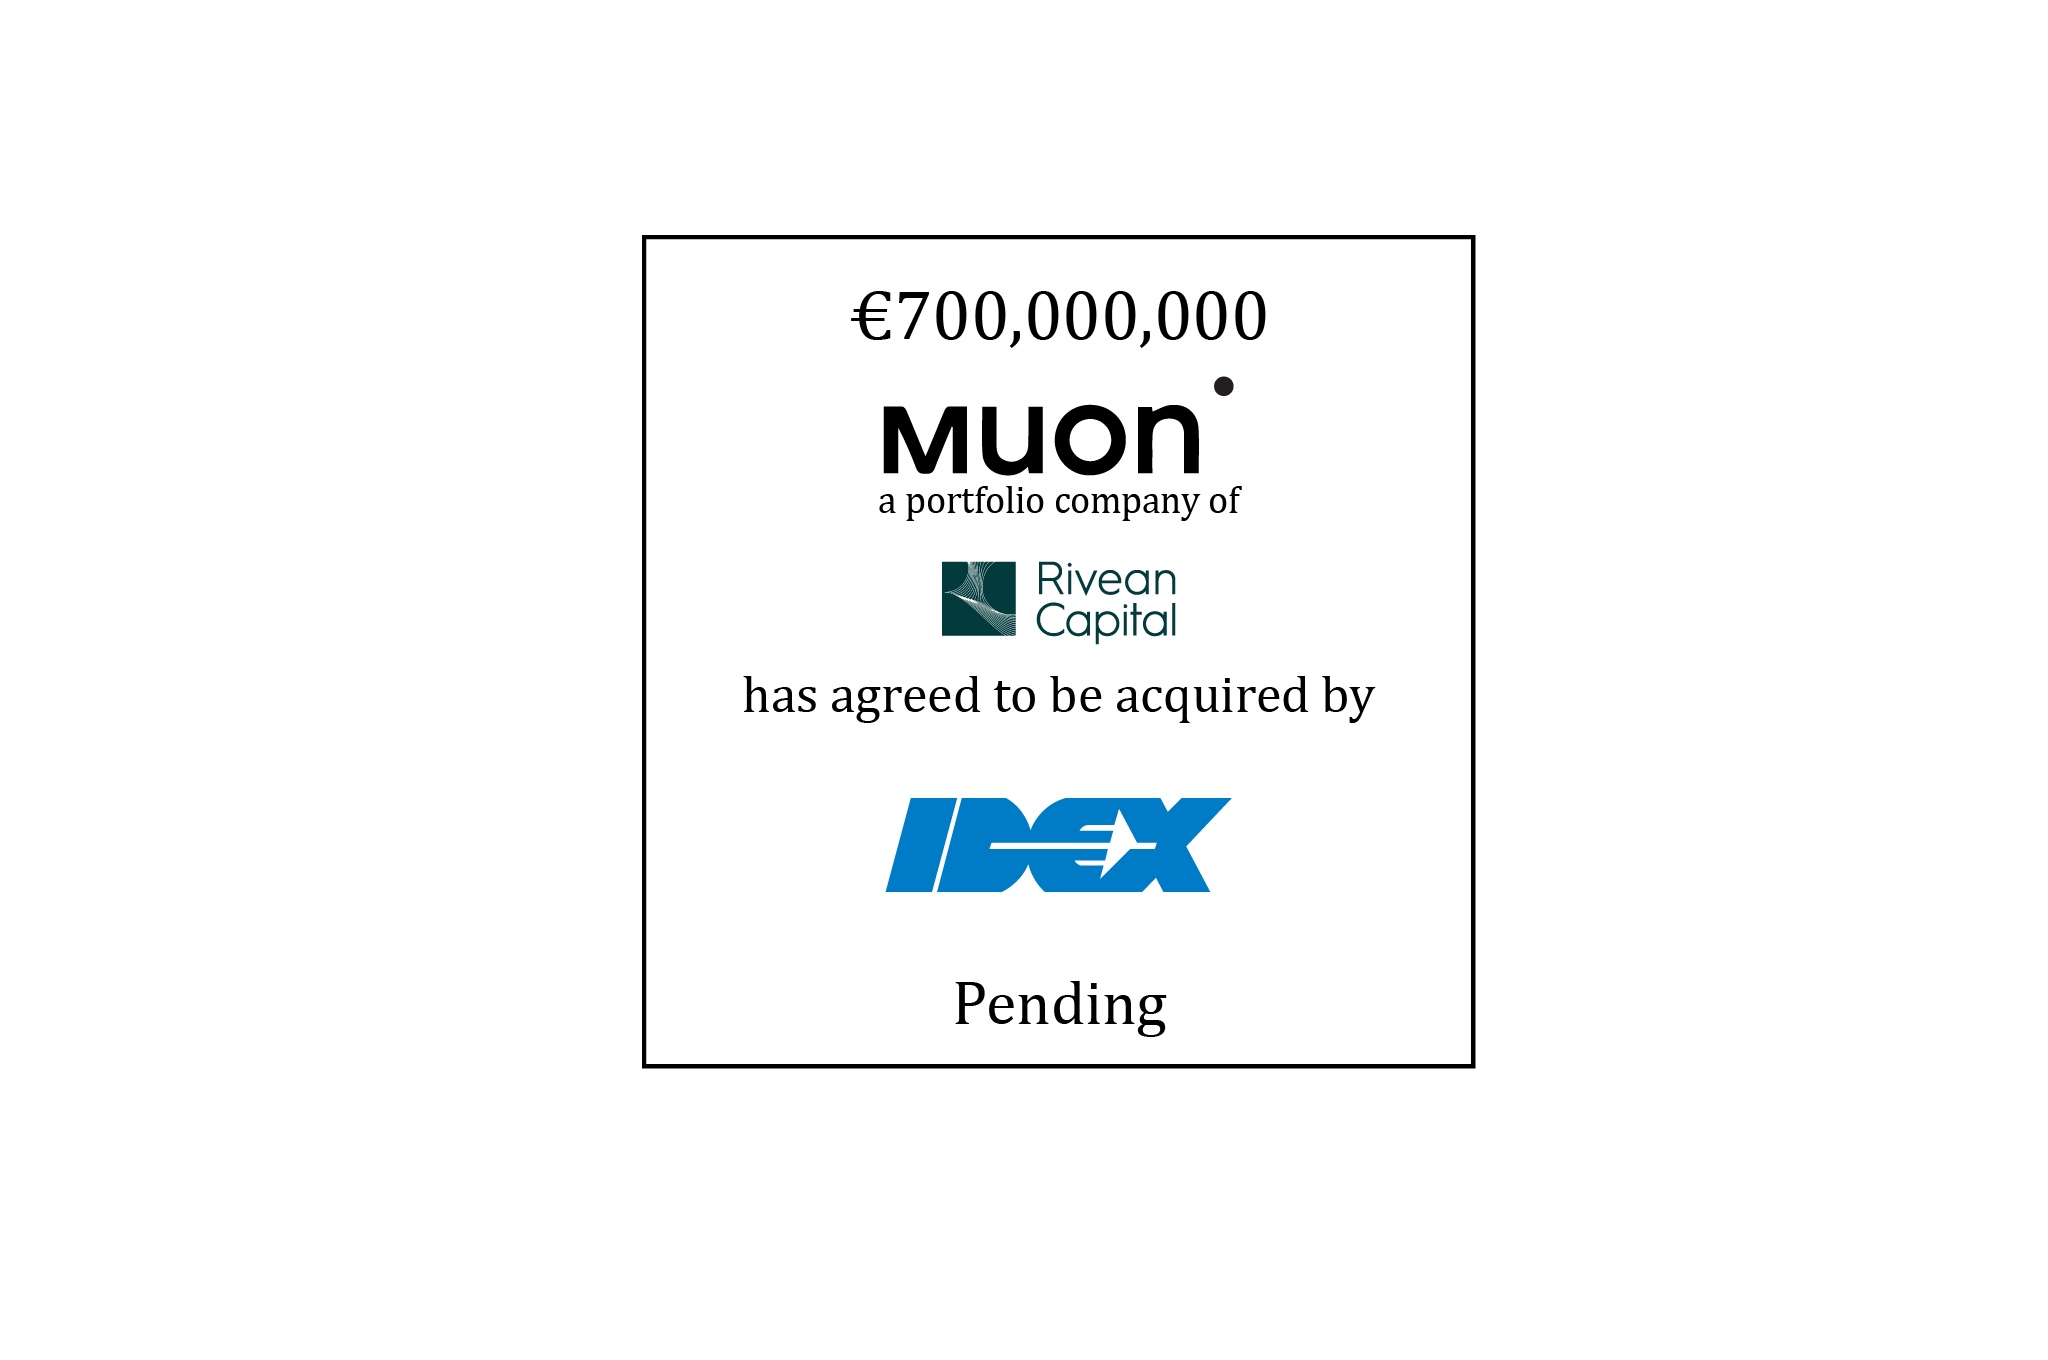 Muon, a portfolio company of Rivean Capital, has been acquired by IDEX